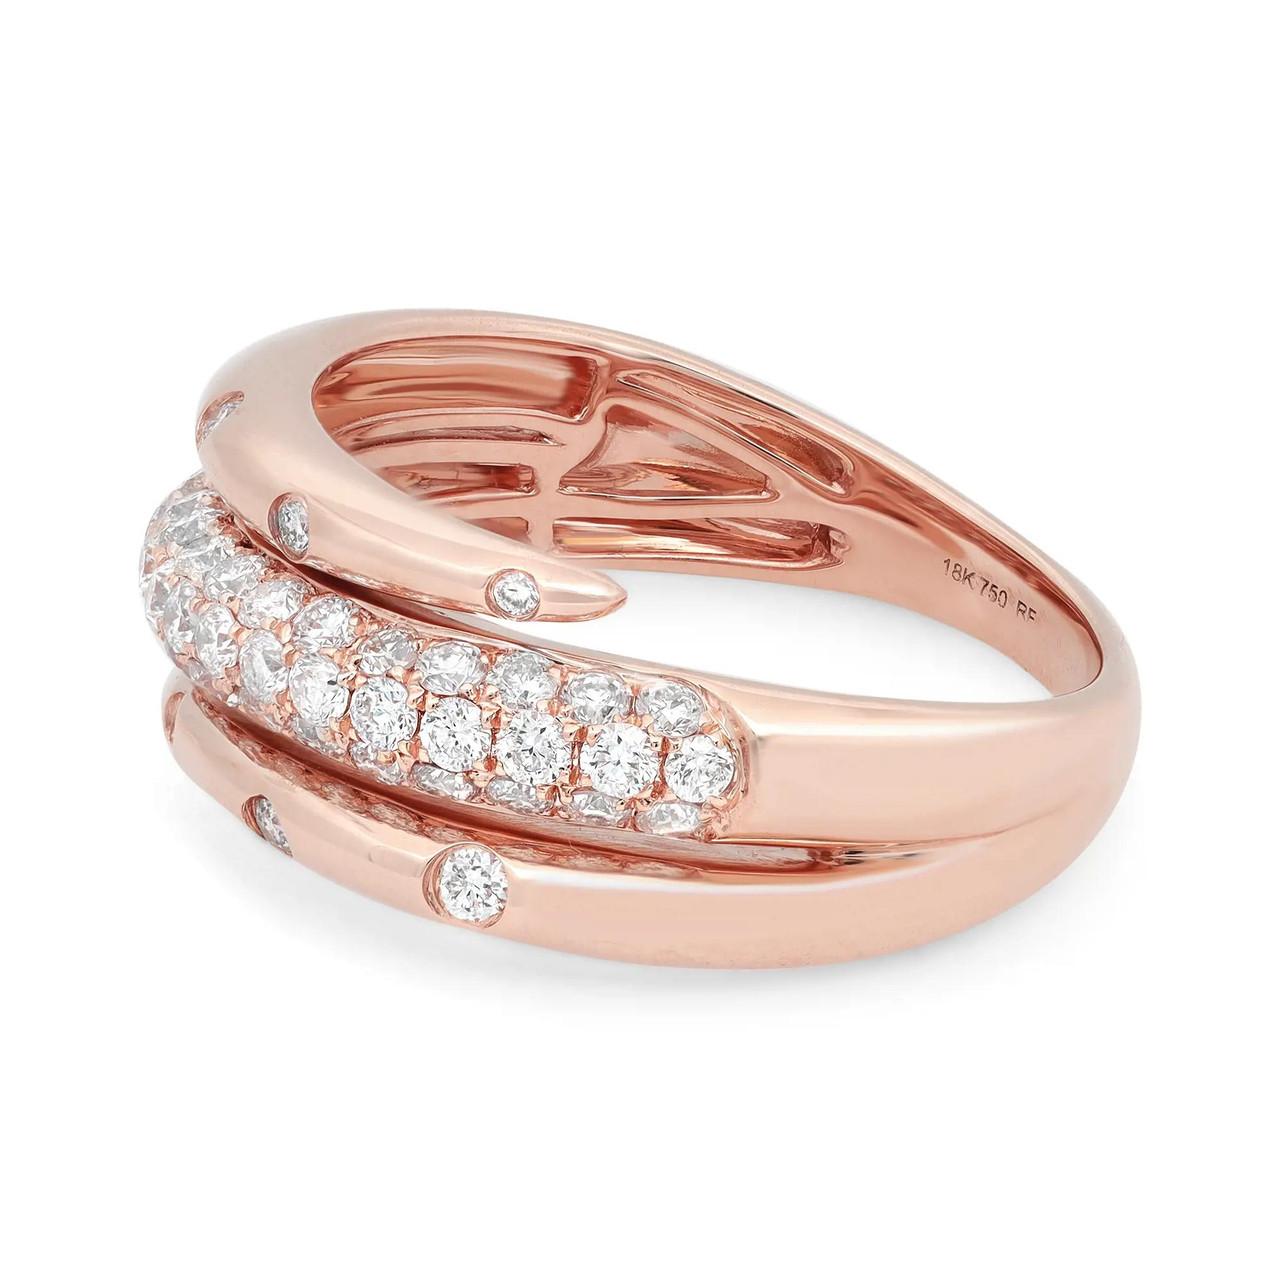 Introducing our stunning 0.77 Carat Diamond Spiral Ring in 18K Rose Gold. Crafted with exquisite attention to detail, this spiral ring showcases the perfect balance of elegance and modernity. The 18K rose gold setting beautifully complements the